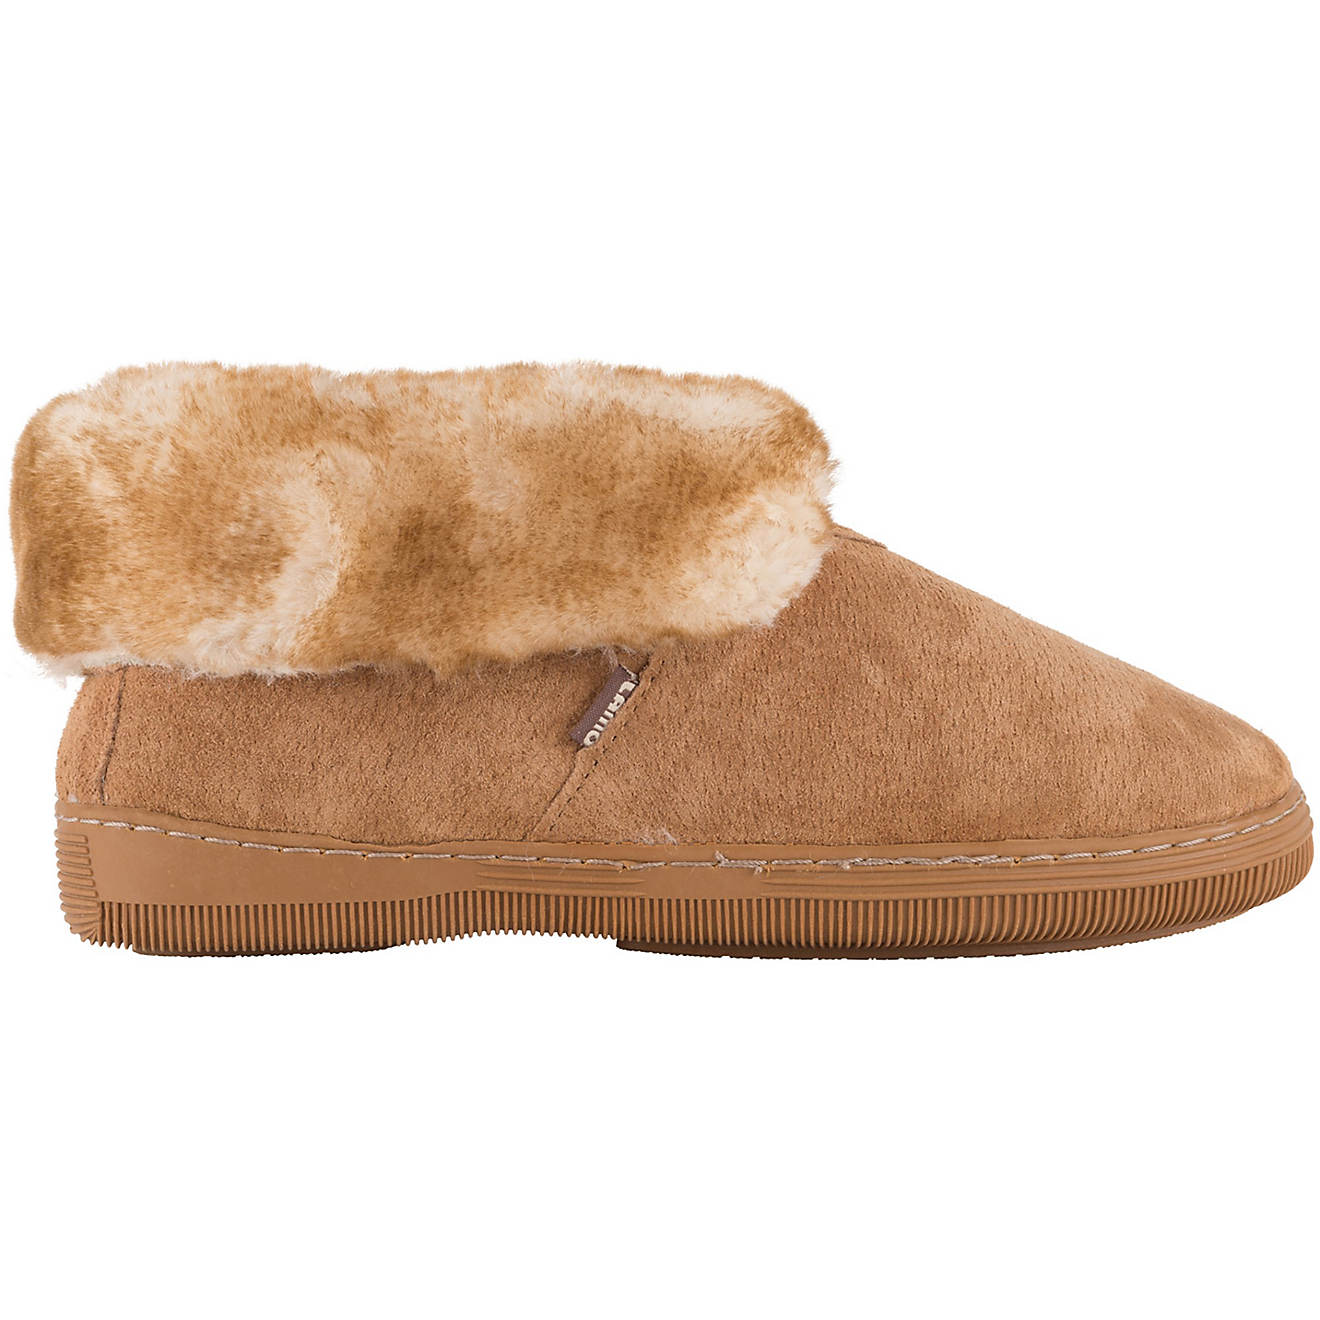 Lamo Women's Bootie Slippers | Free Shipping at Academy